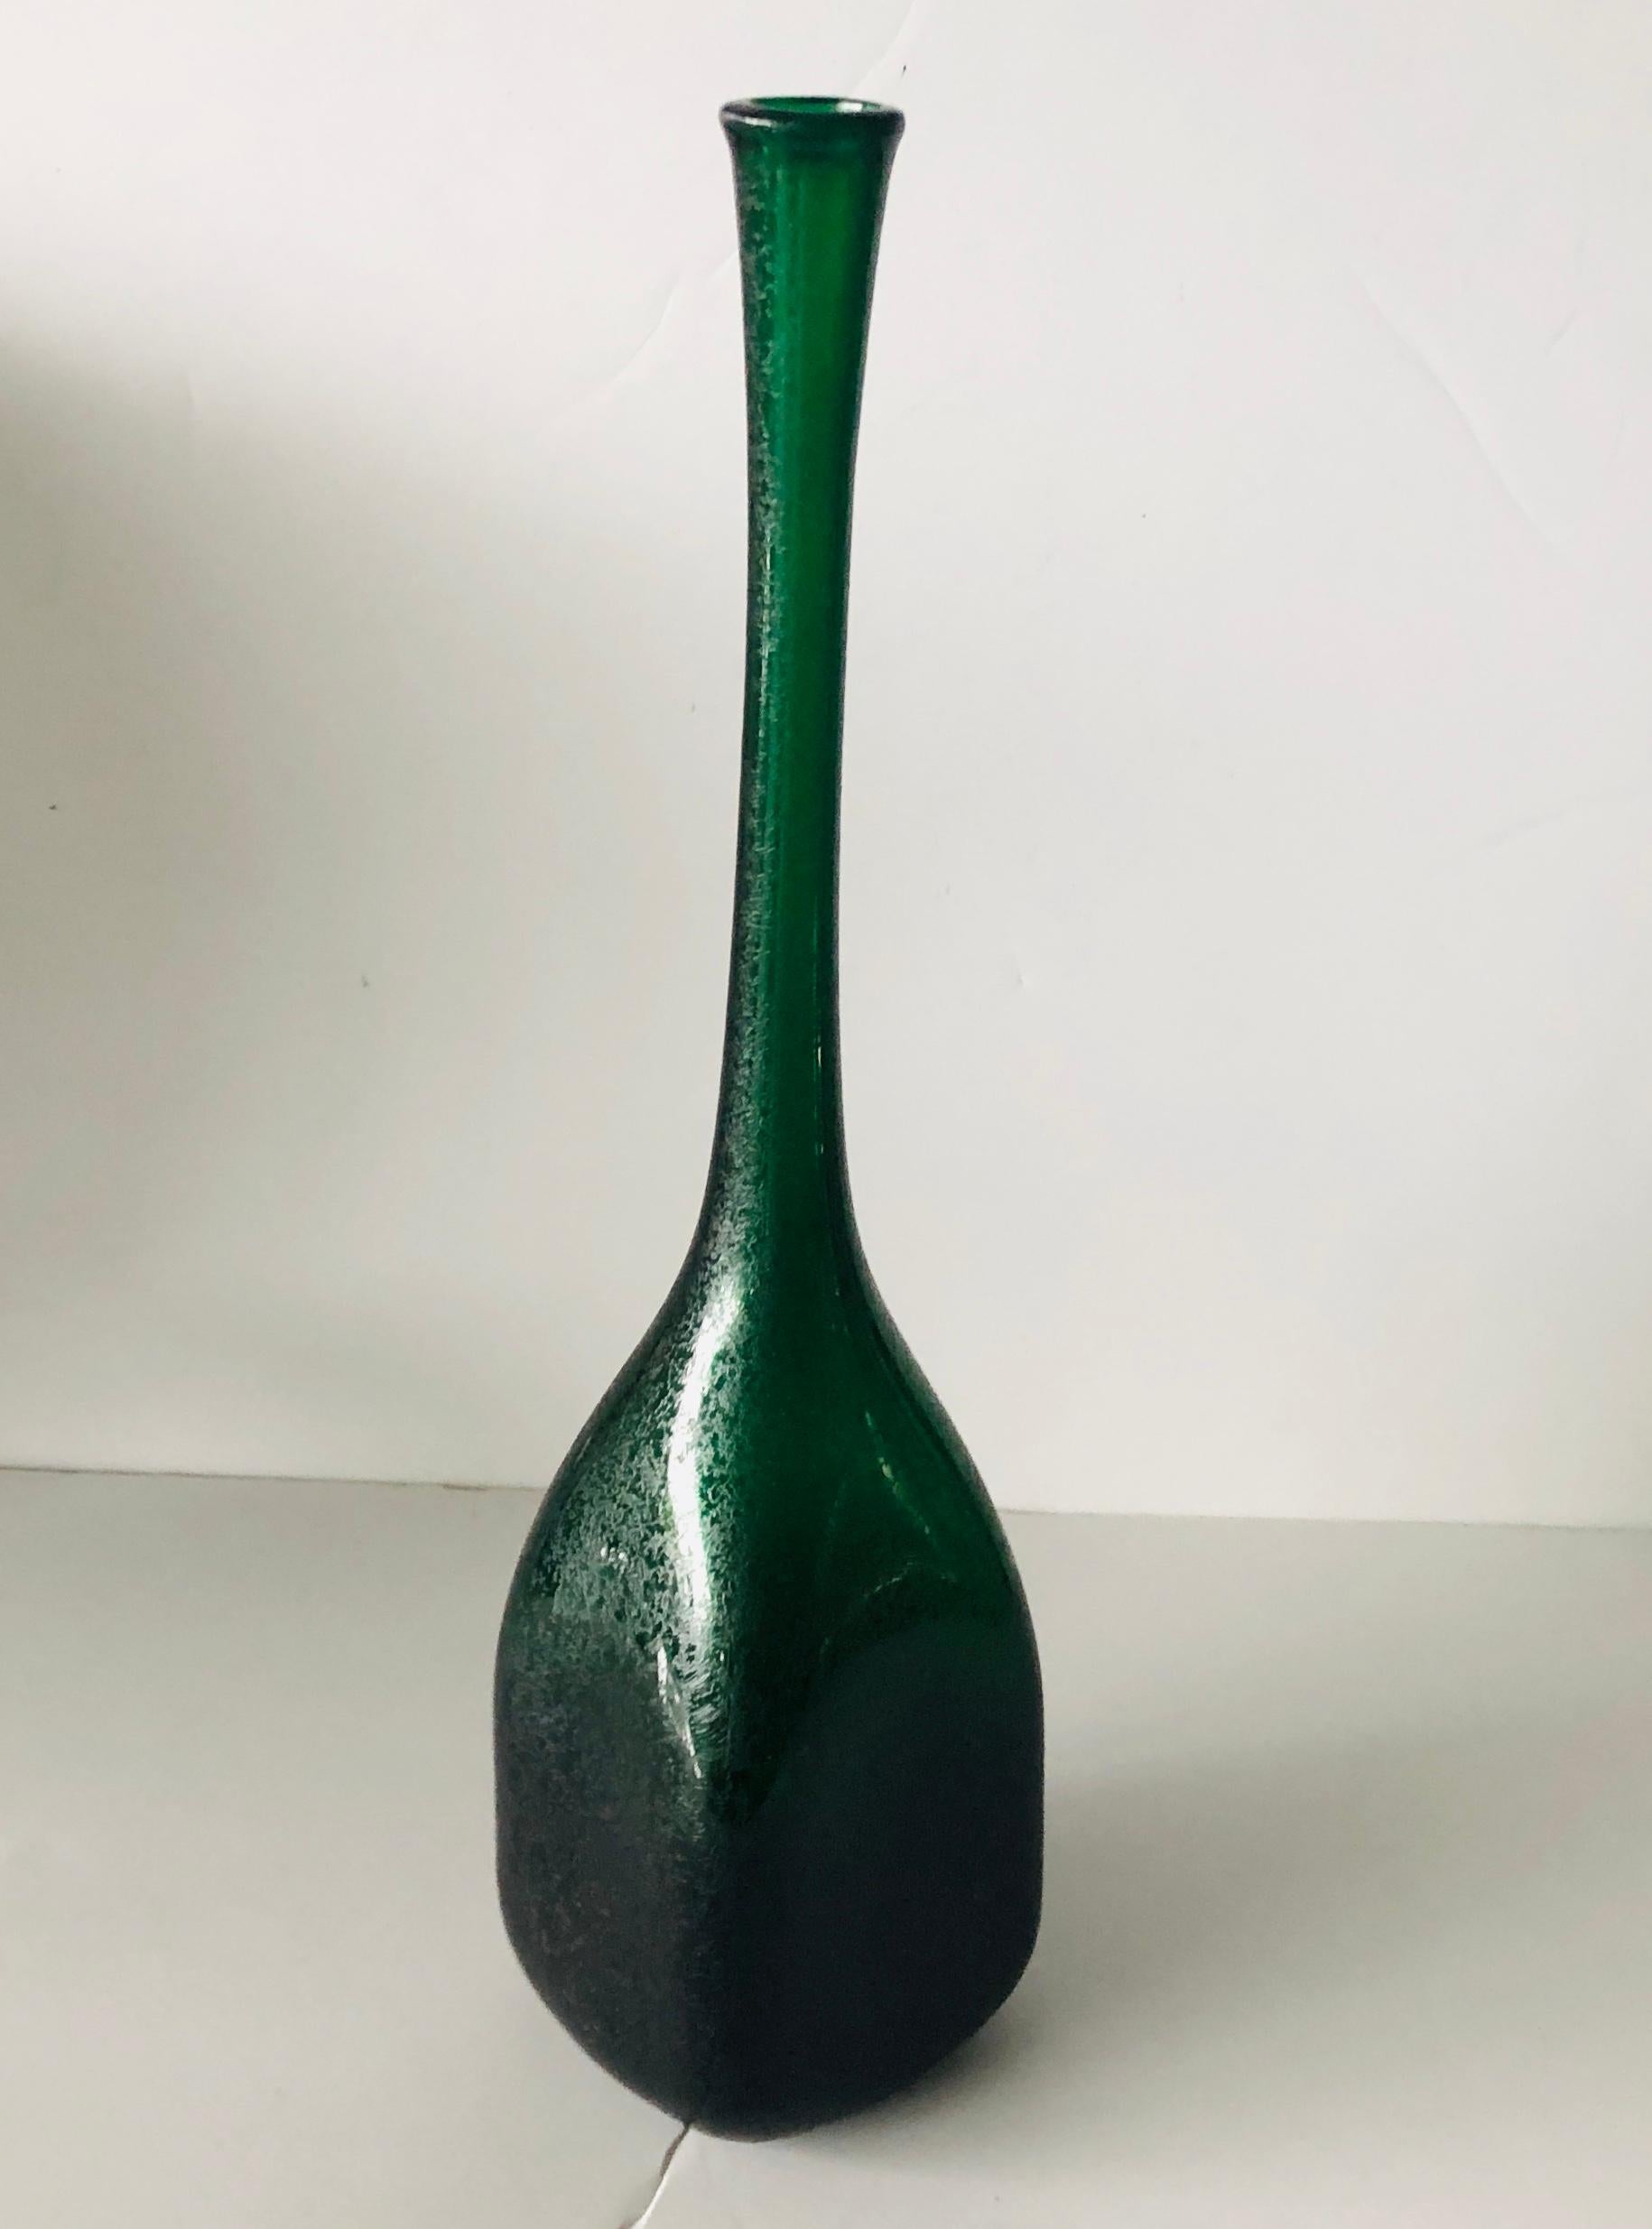 Offered is a Mid-Century Modern Italian stunning rare tall elongated bottle neck in dark emerald green vase with acid-etched 